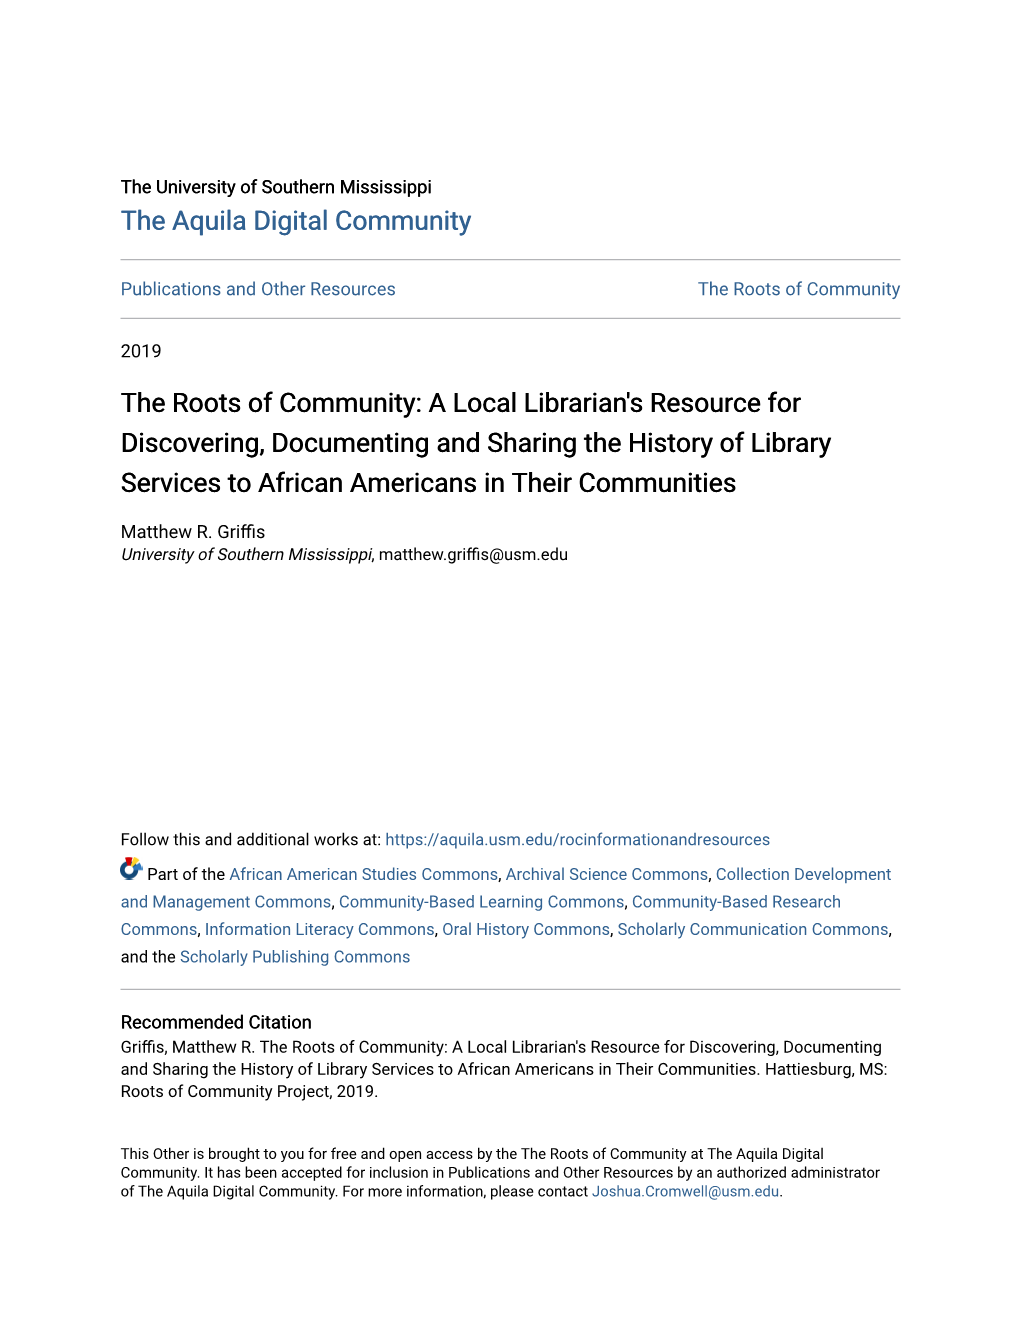 The Roots of Community: a Local Librarian's Resource For